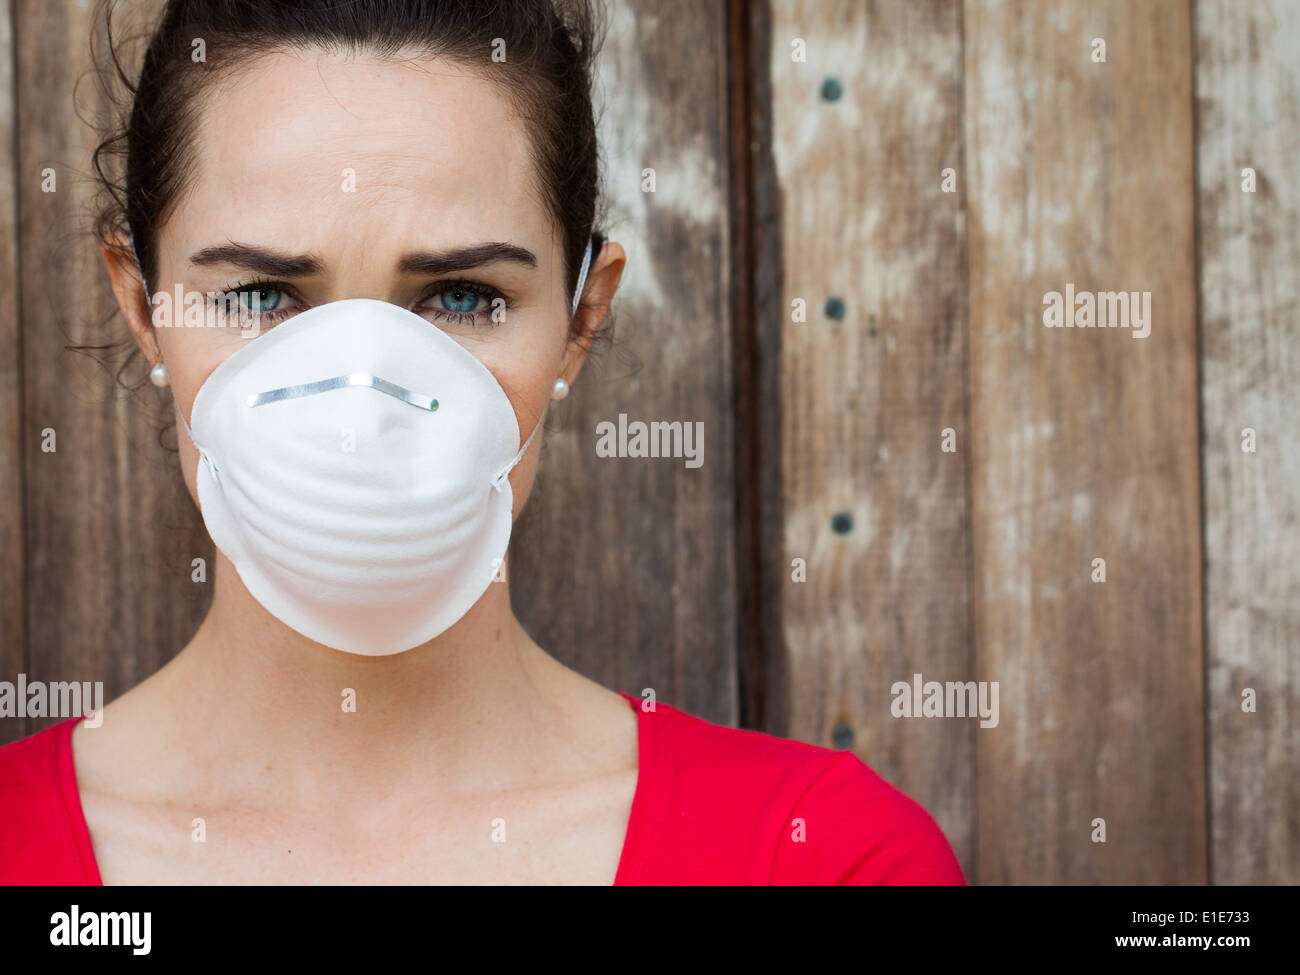 An unhappy woman wearing a face mask to deal with virus or pollution. Stock Photo